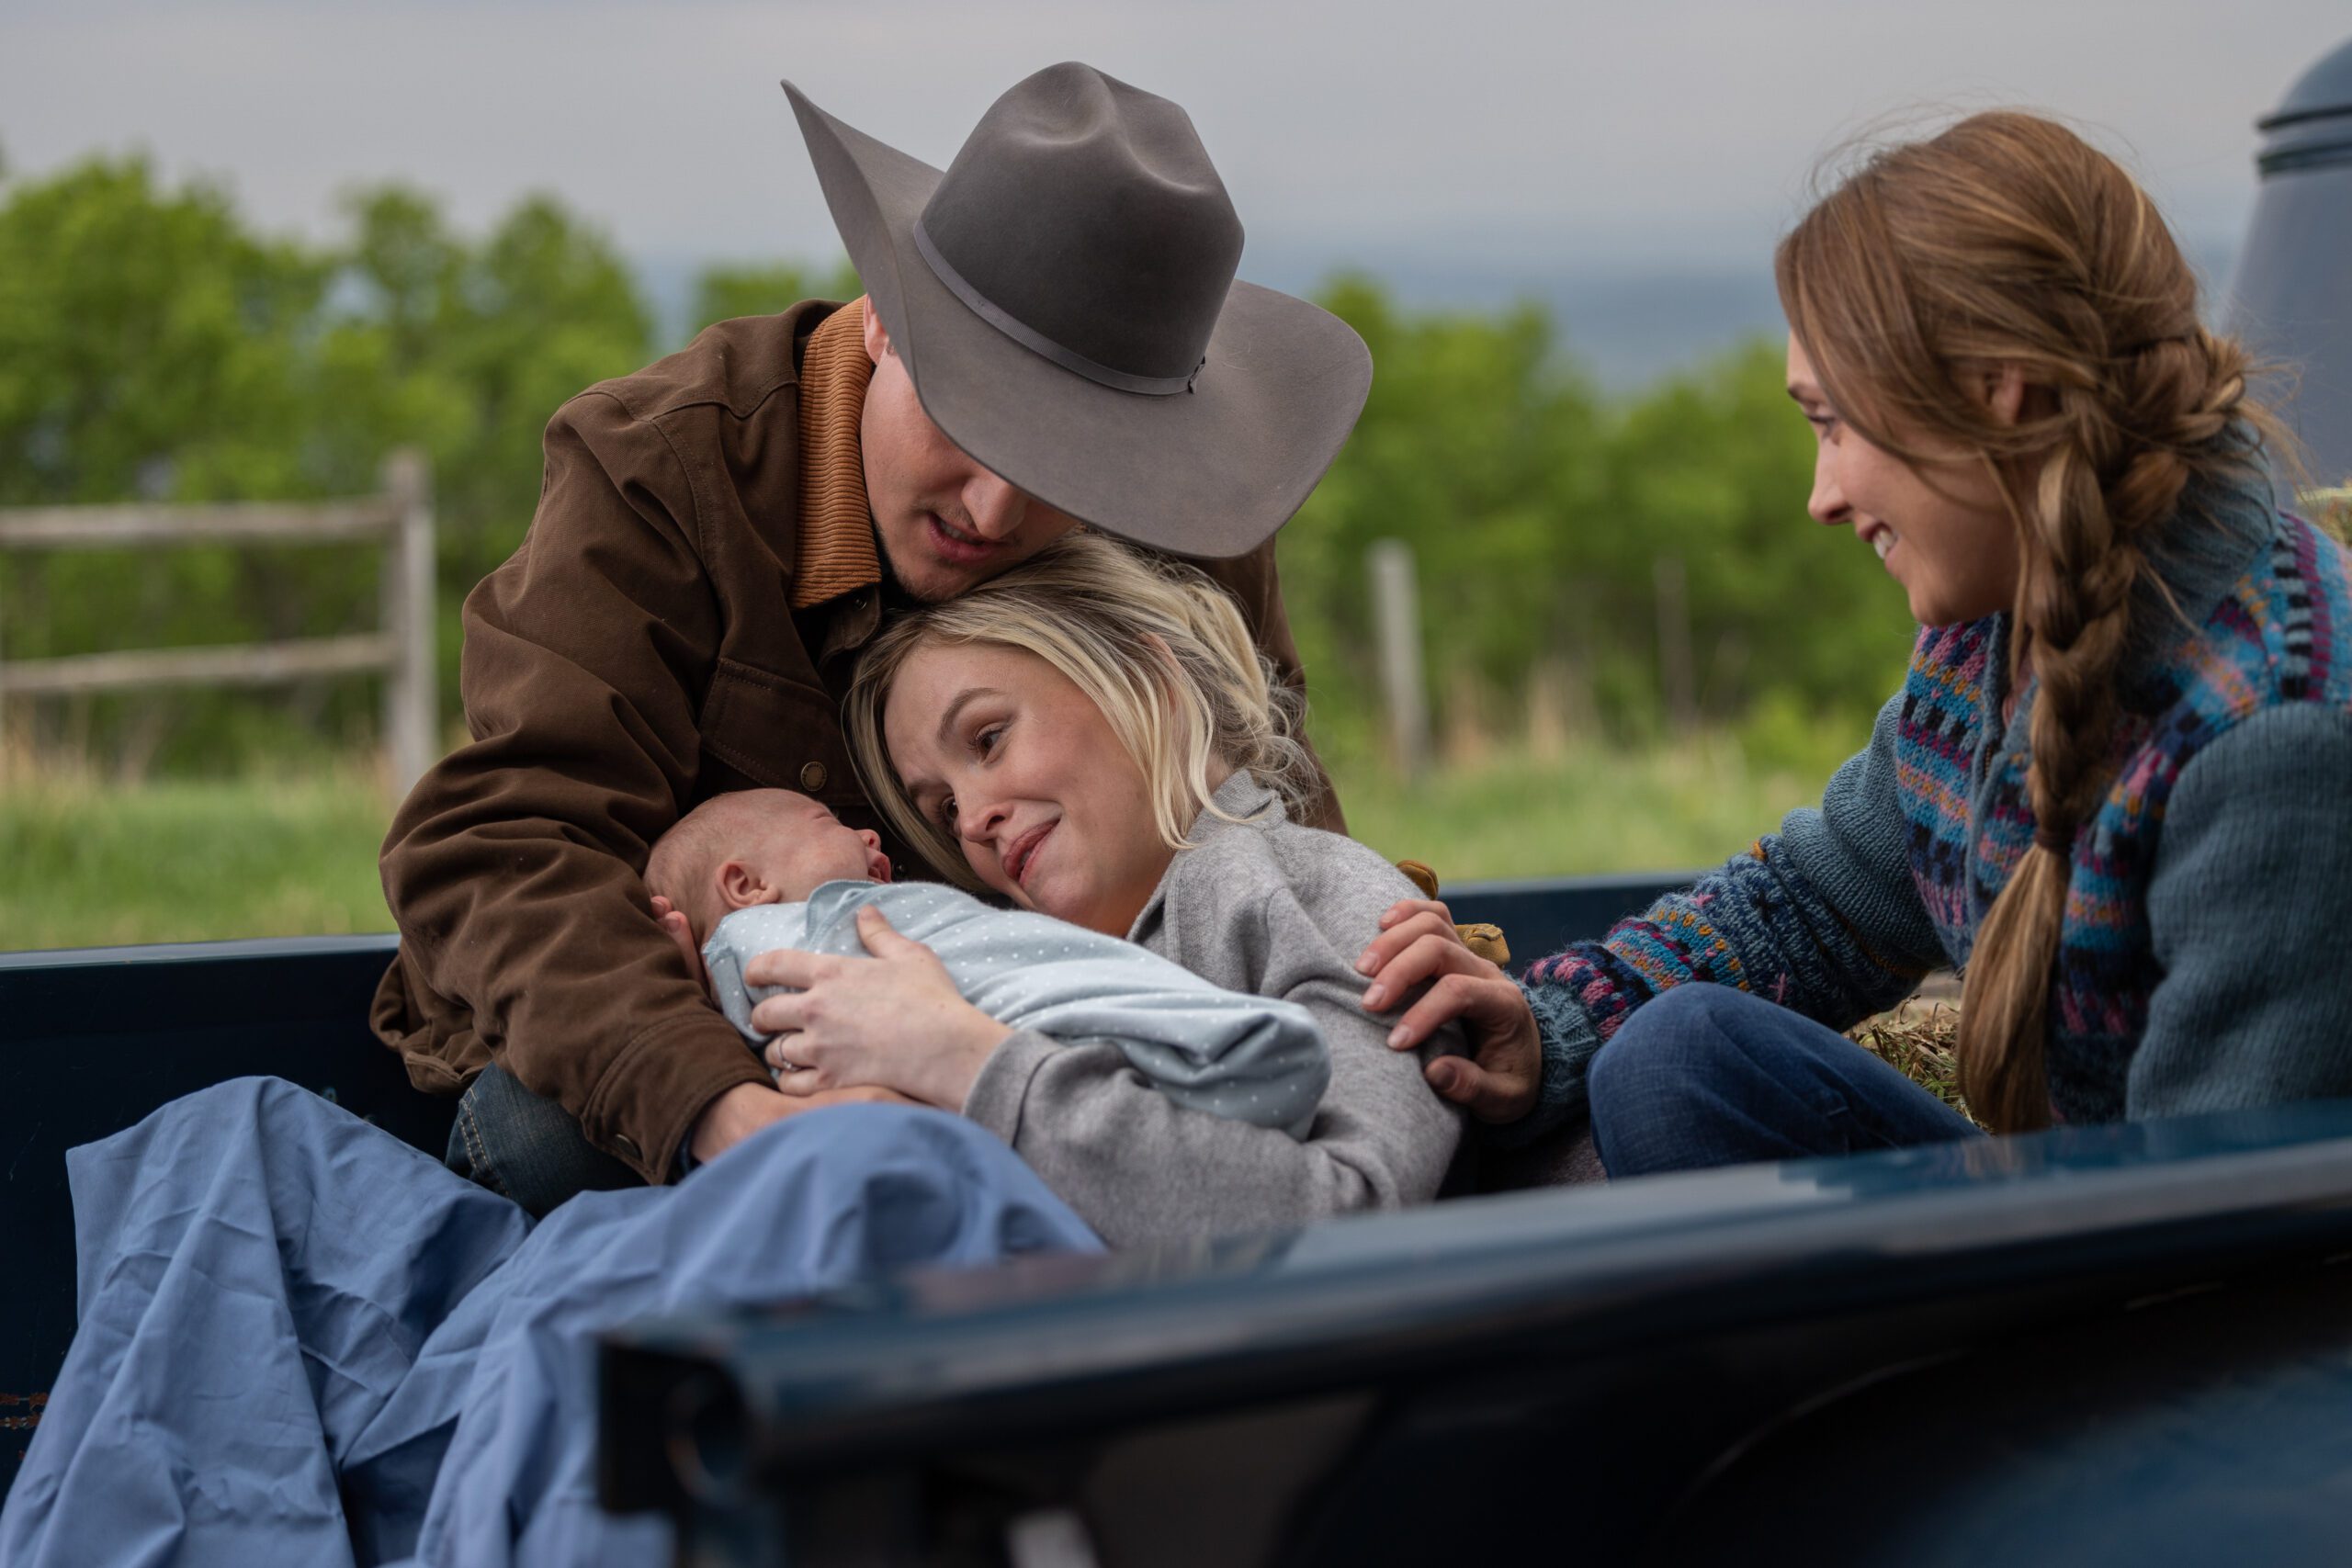 Heartland Catch UP: Season 17 Episode 1 “The Path Less Traveled”